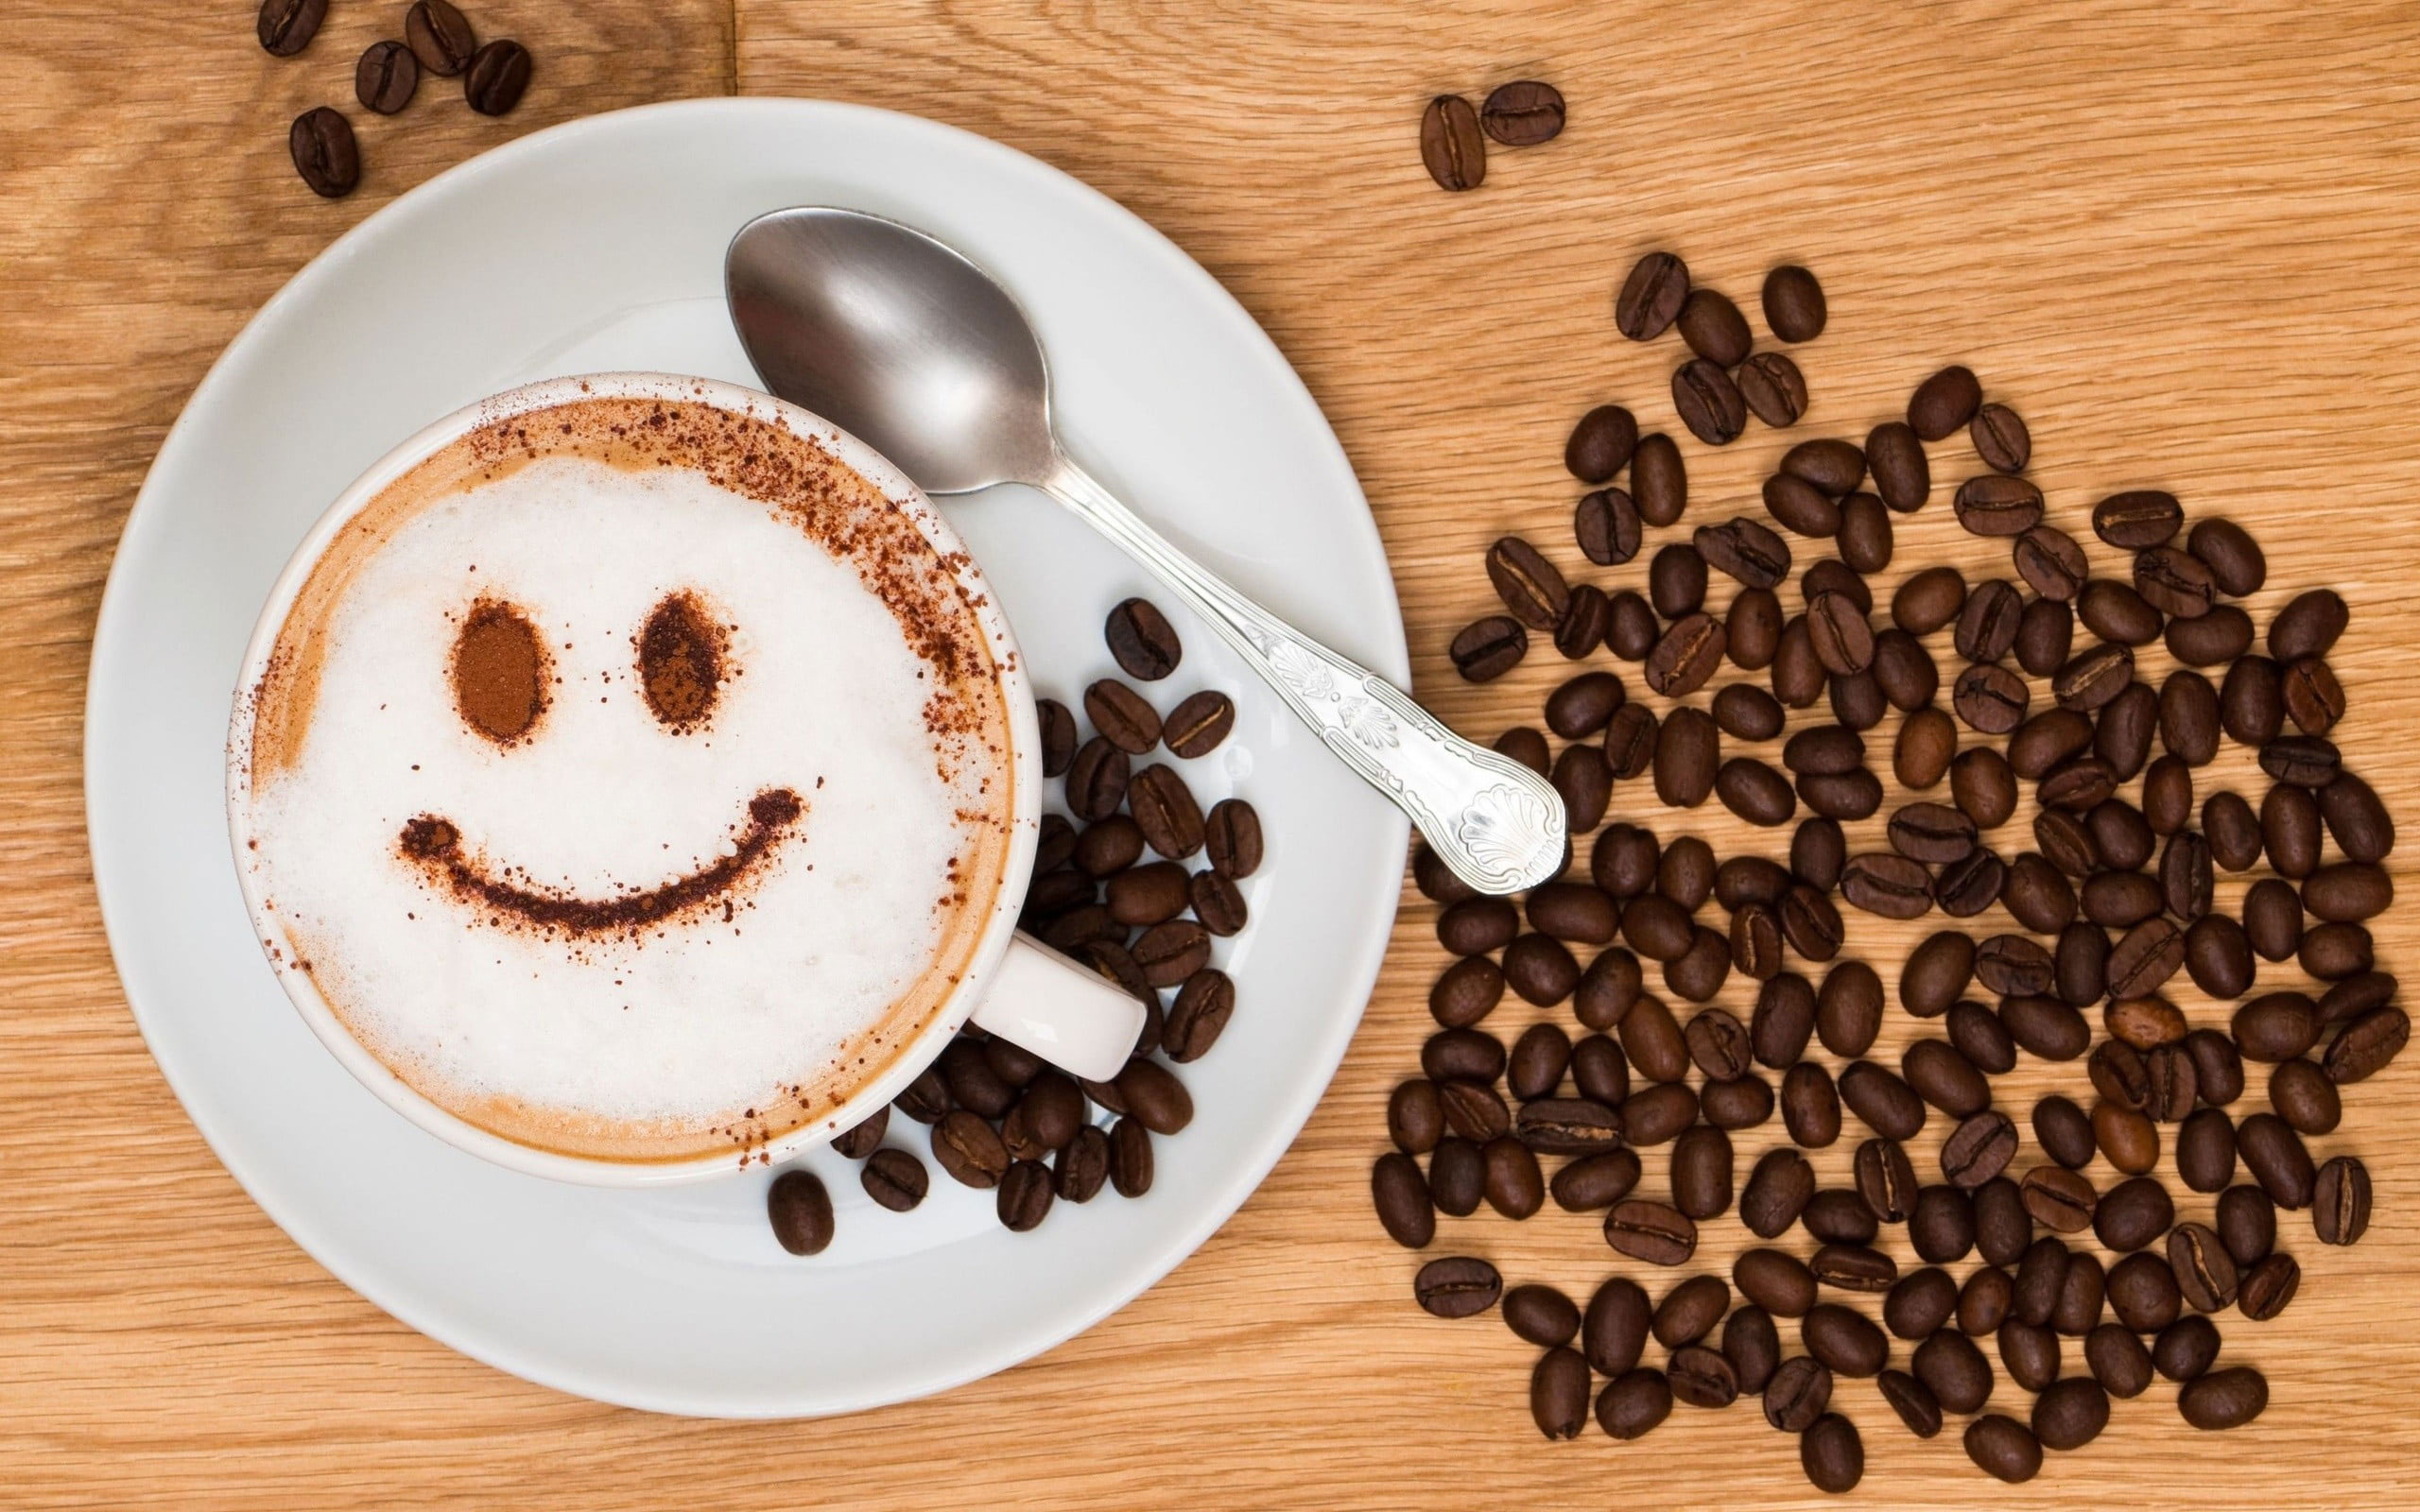 Brown coffee beans wallpaper, drink, smiley, spoon, cup, food and drink